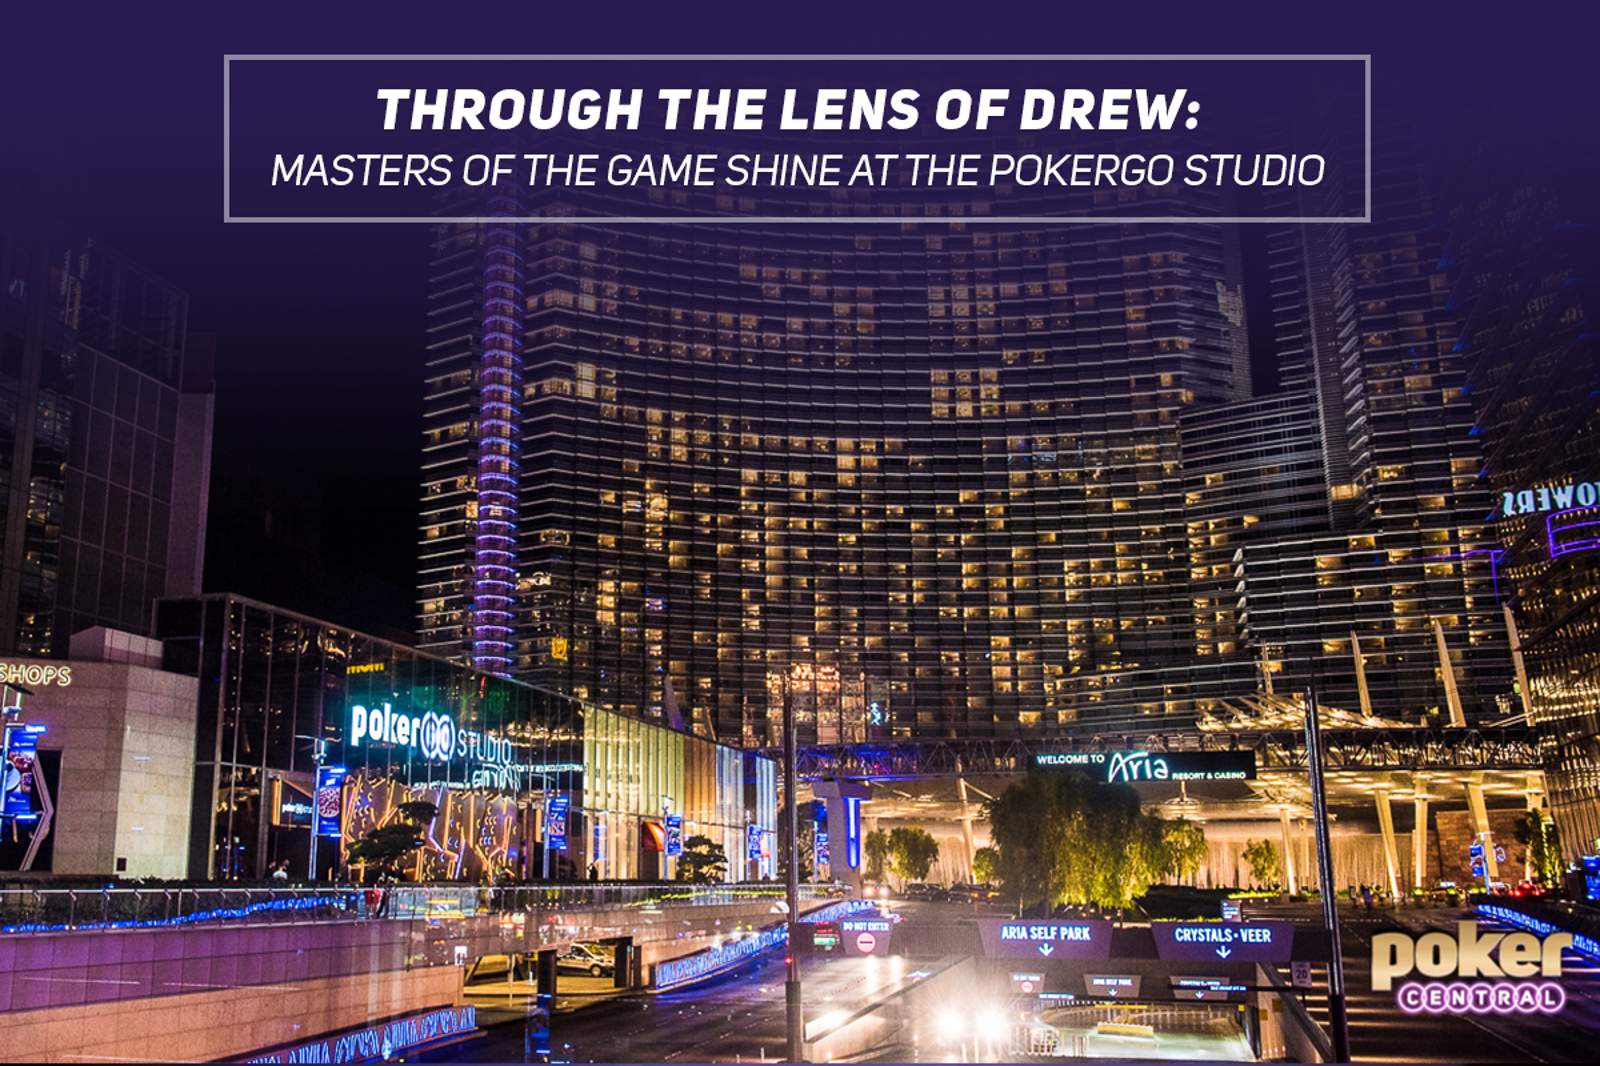 Through the Lens of Drew - Masters of the Game Shine at the PokerGO Studio